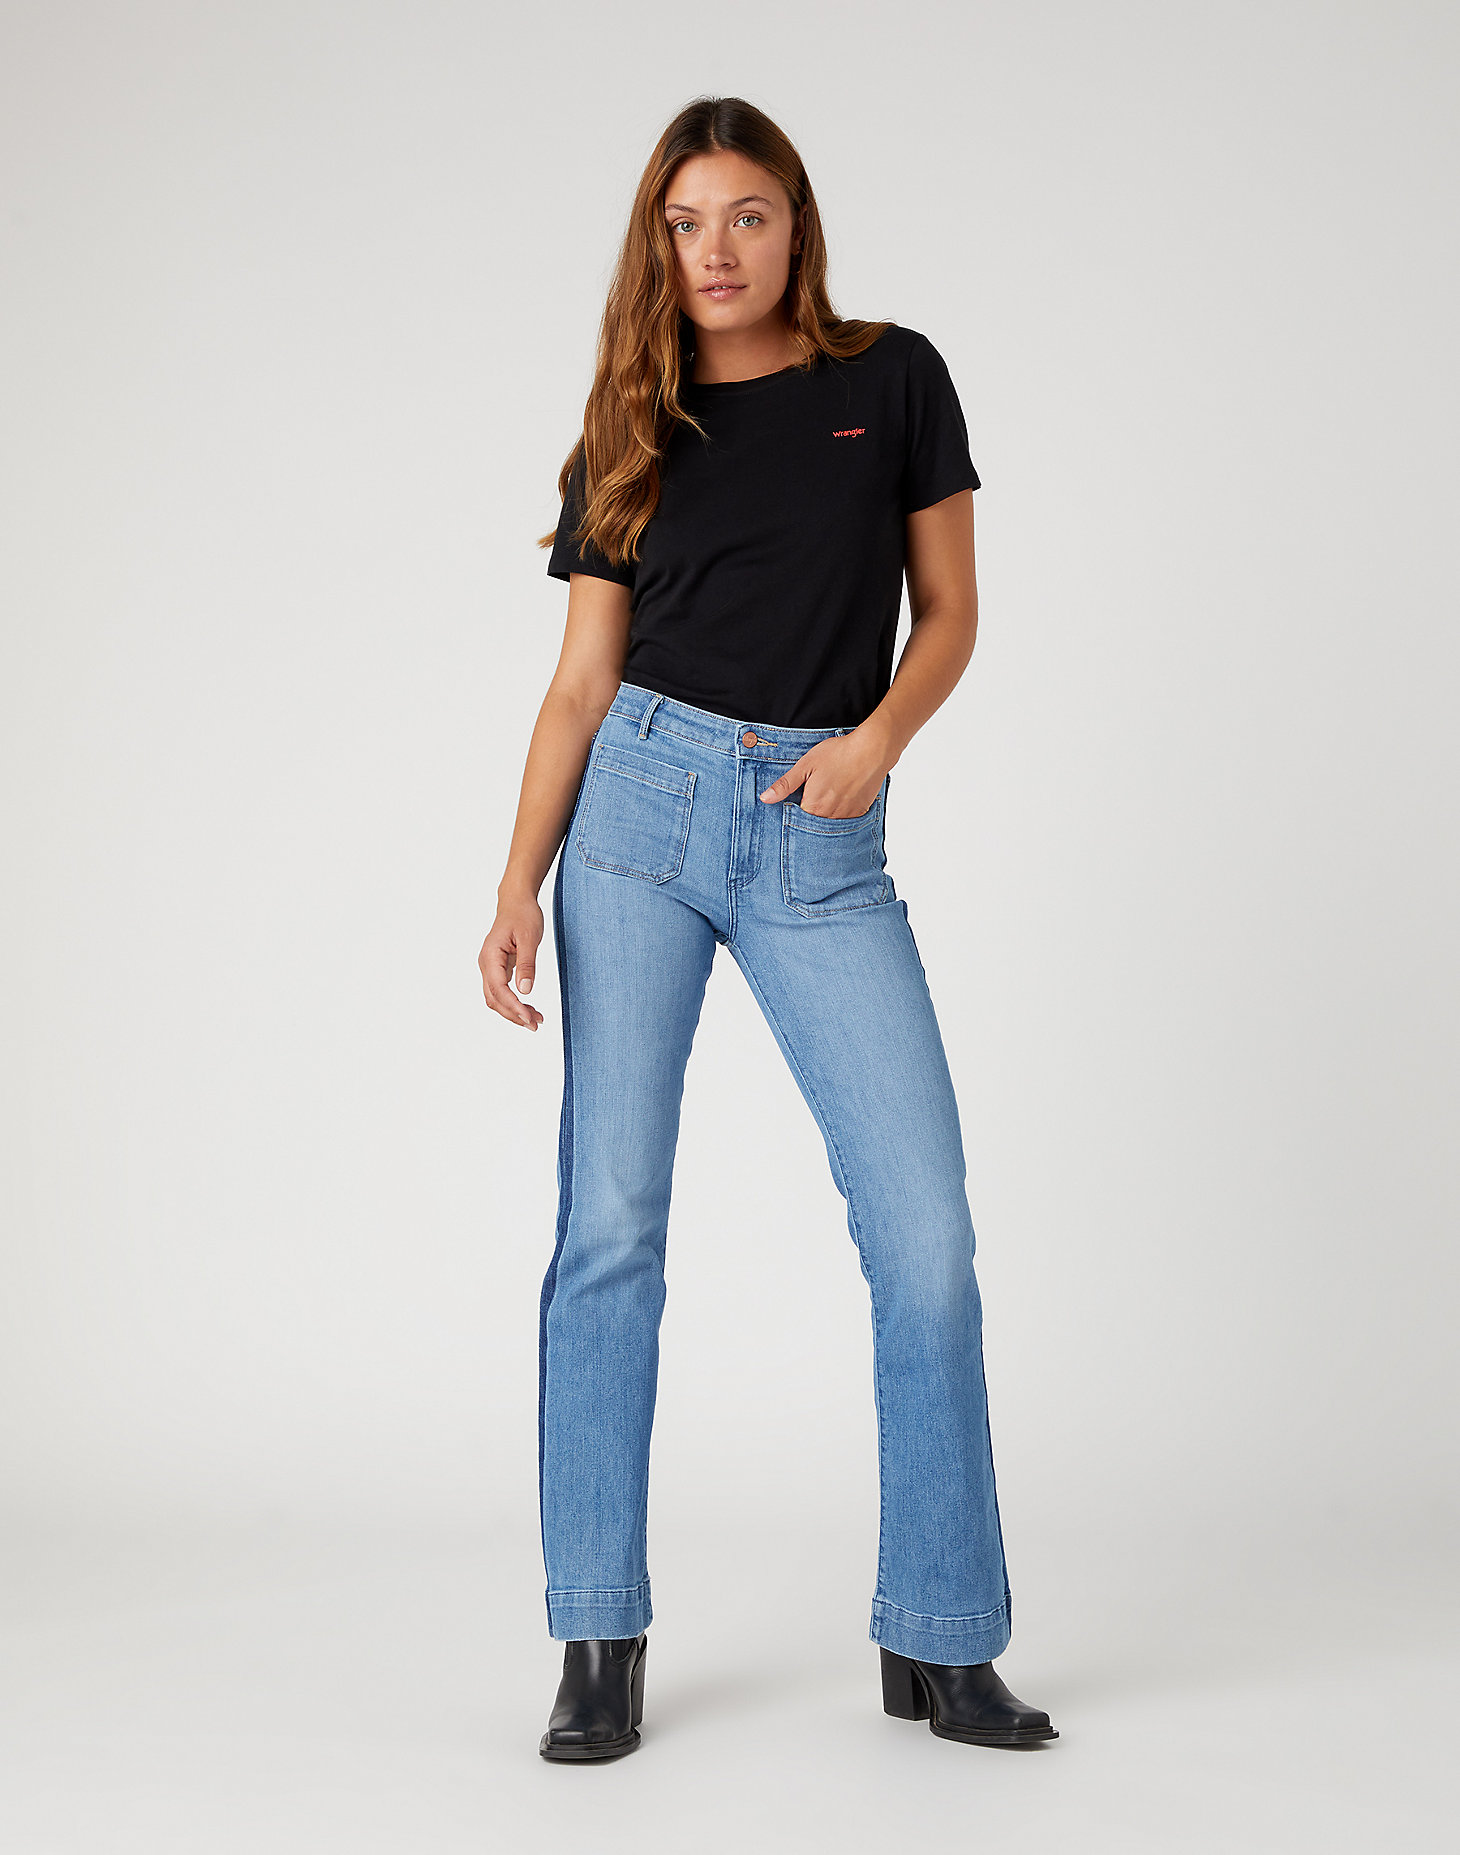 Flare Jeans in Shady Lady alternative view 1